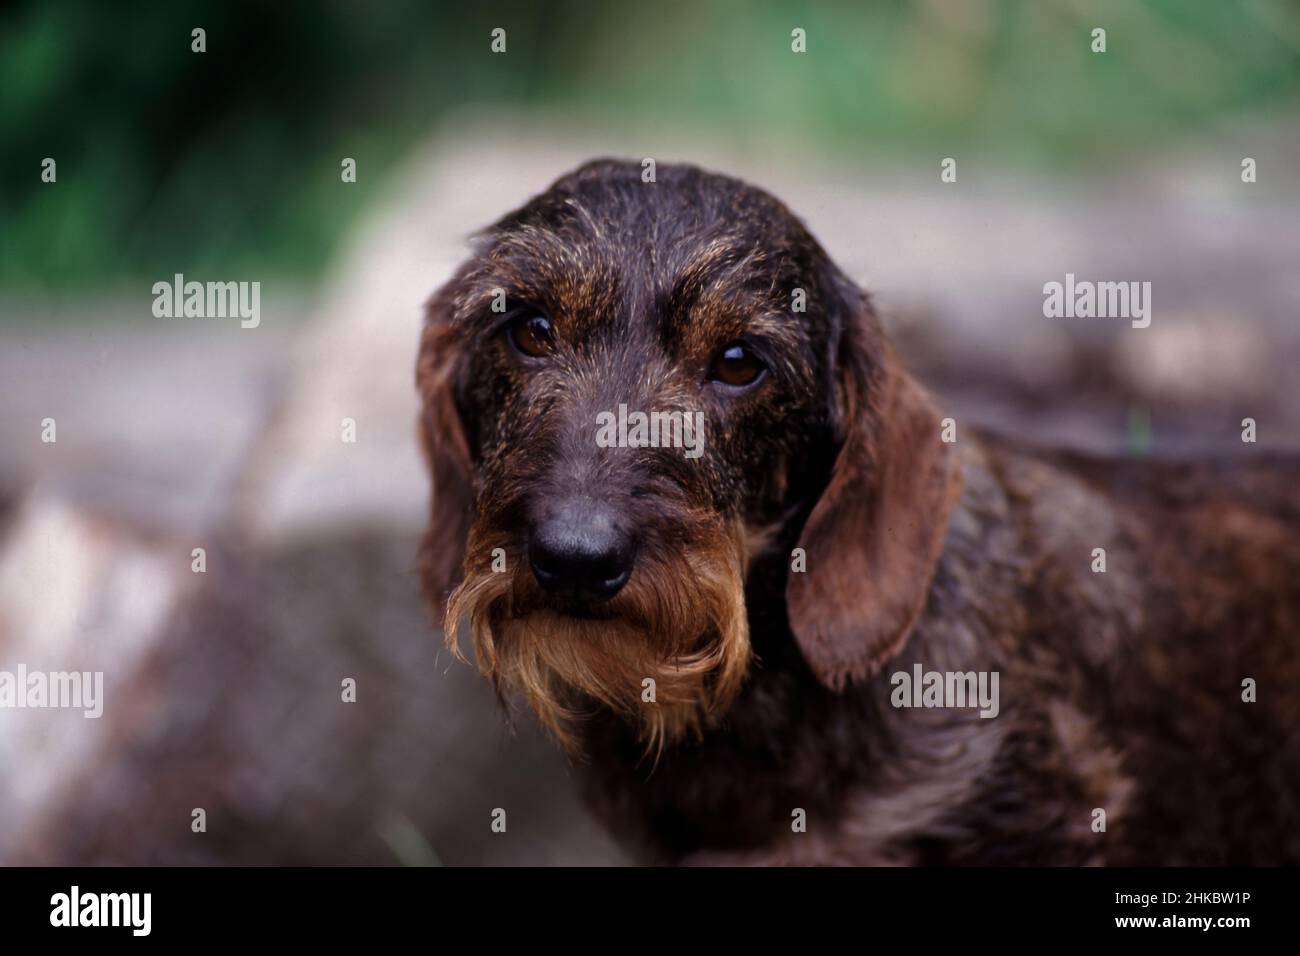 Miniature wire haired dachshund portrait standing on log. Stock Photo